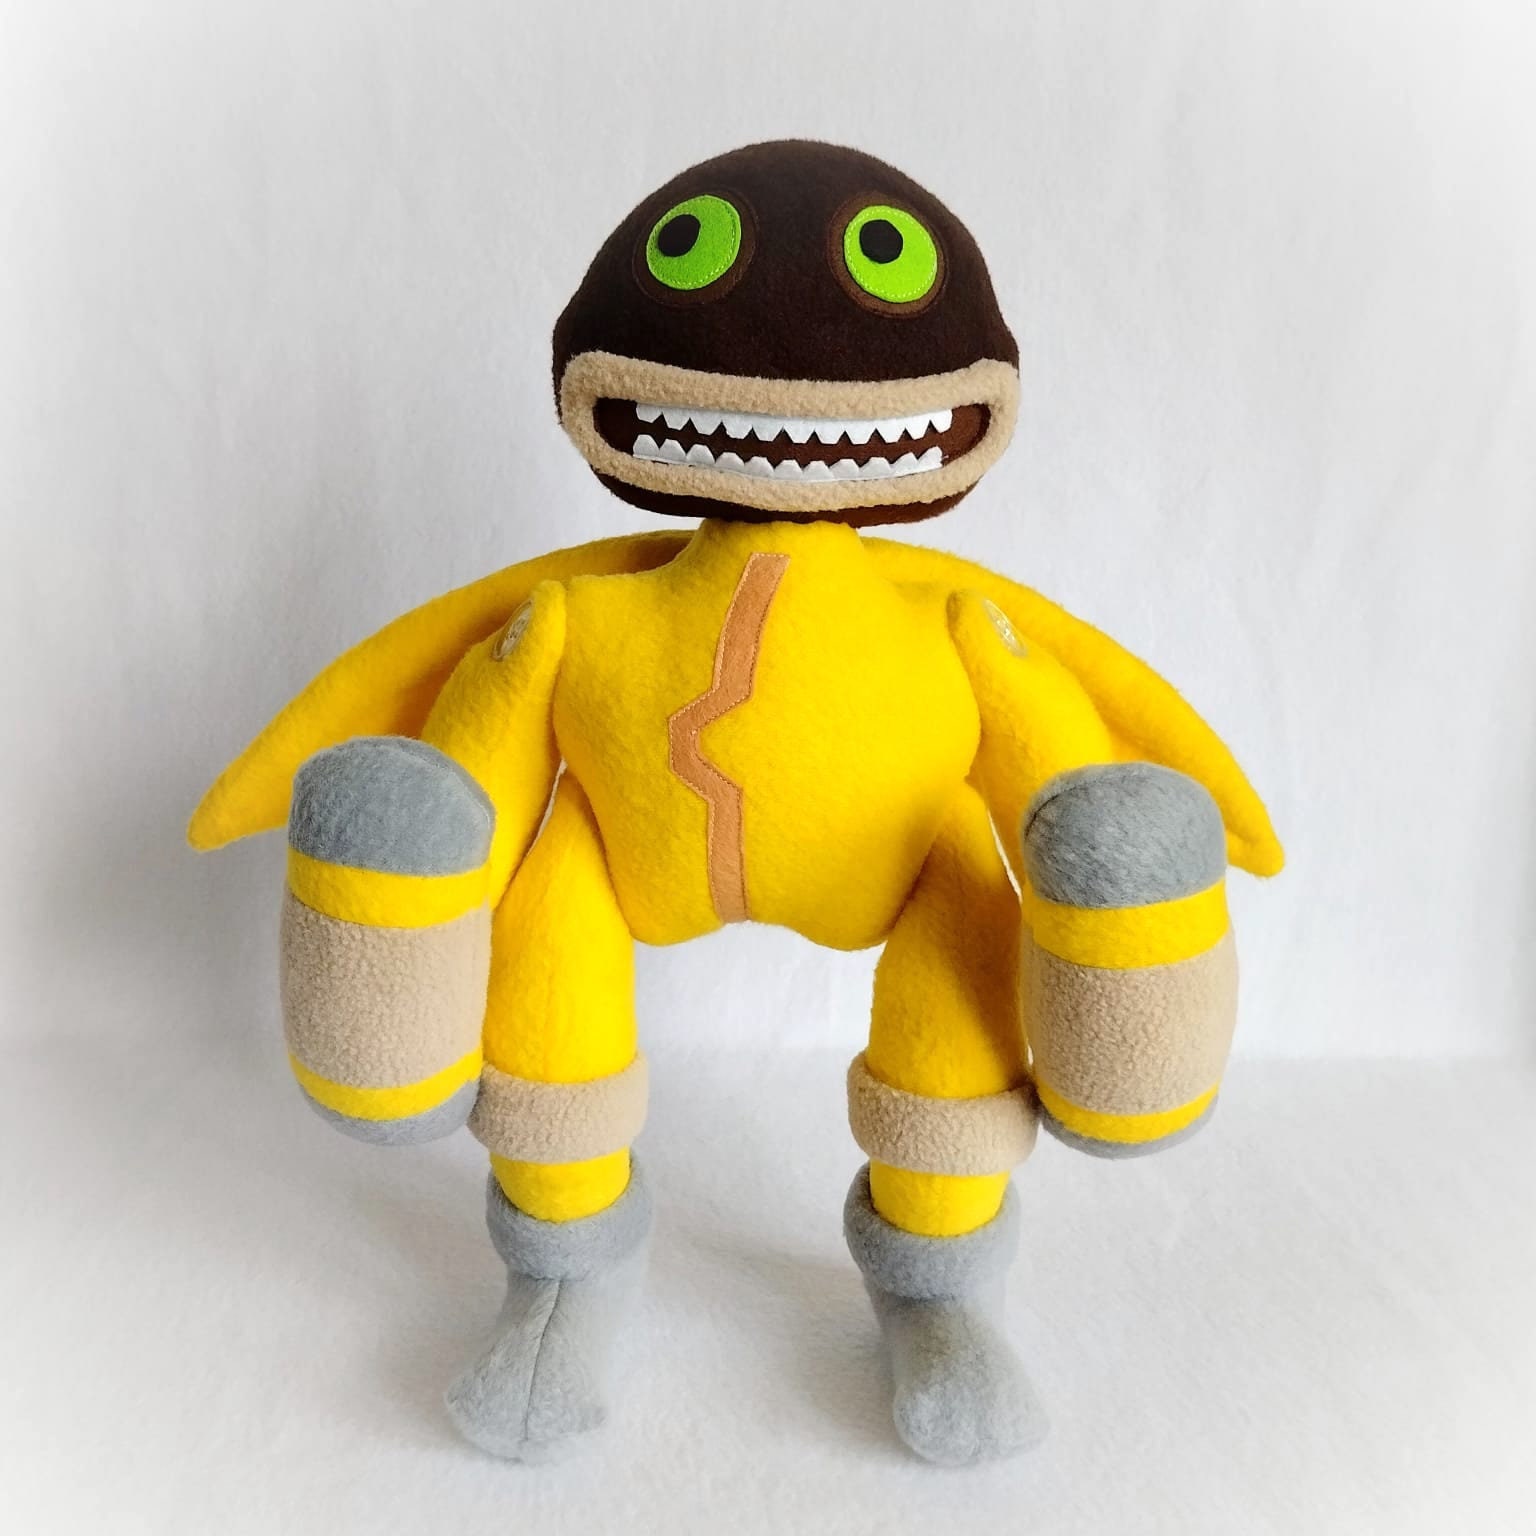 MY SINGING MONSTERS Rare Wubbox Plush A Must-have For Fans $16.40